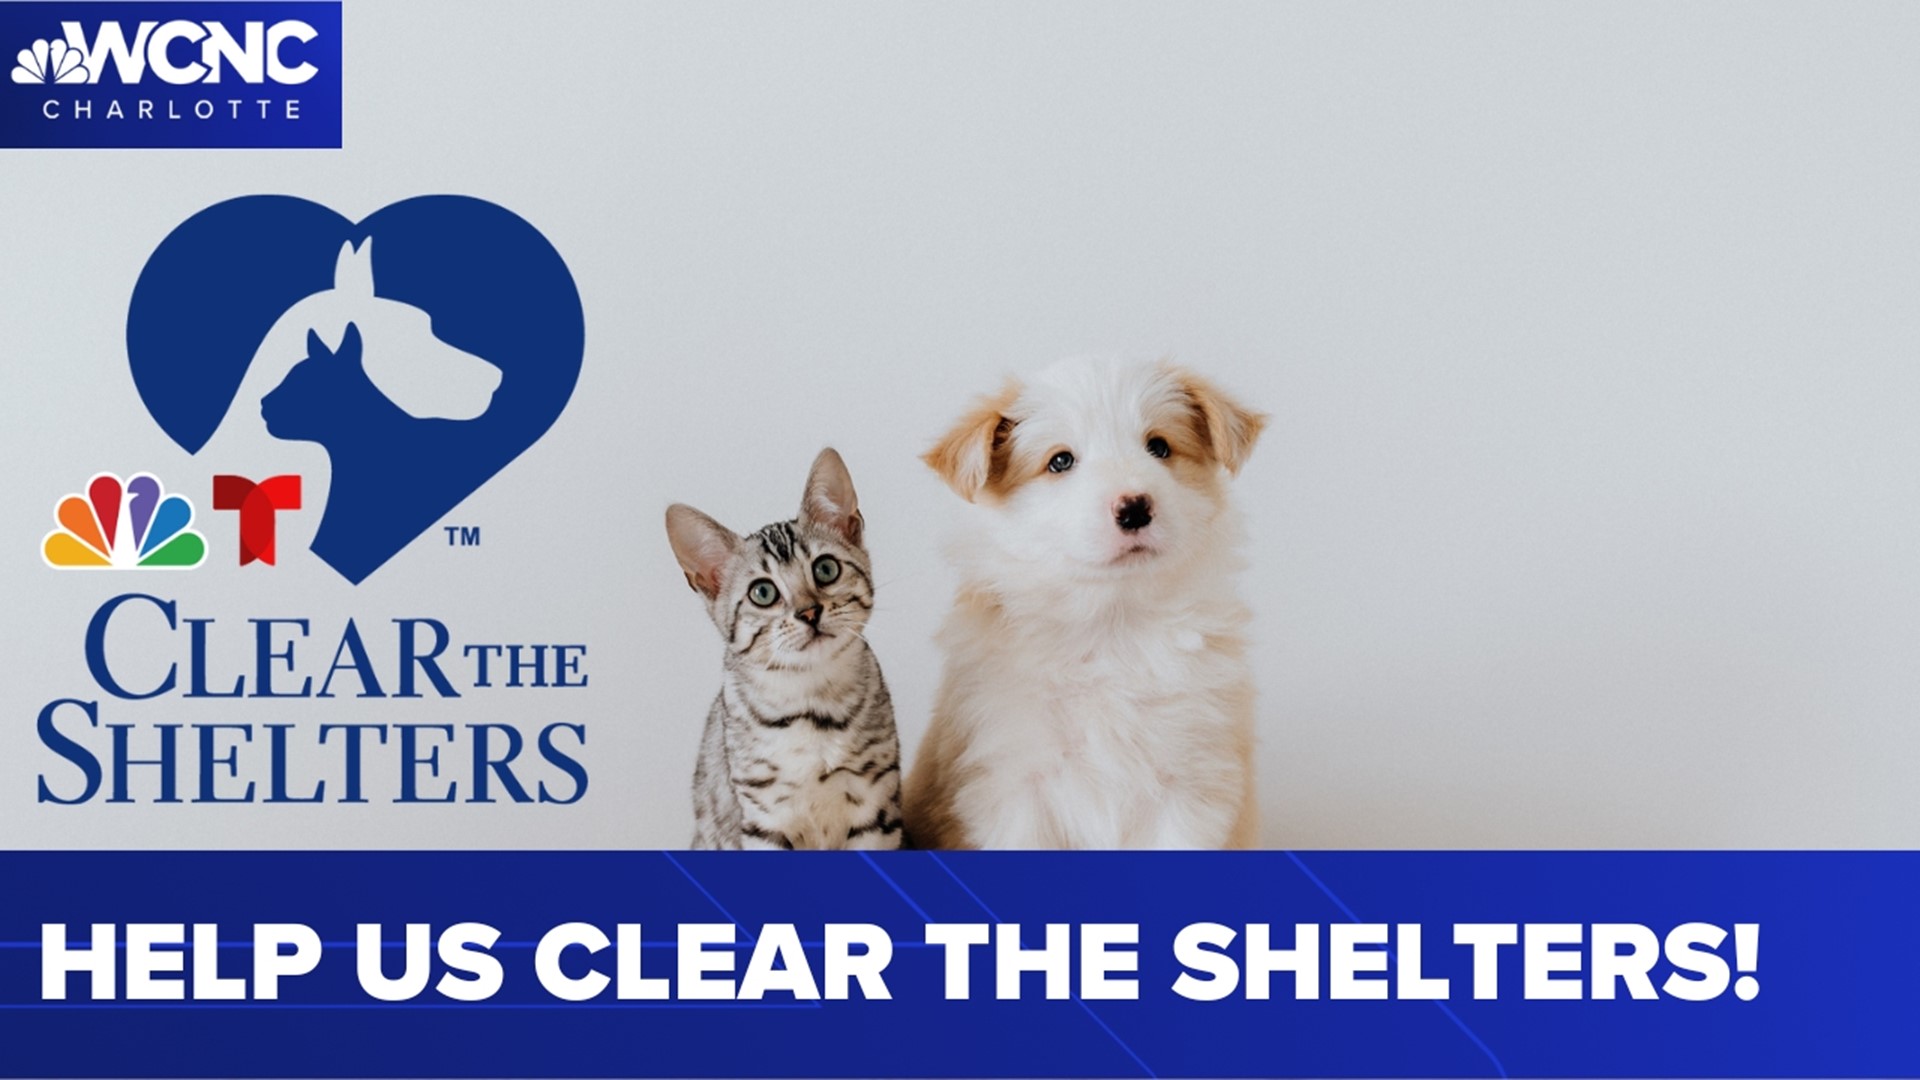 Brittany Van Voorhees shares how you can help WCNC Charlotte and area shelters!